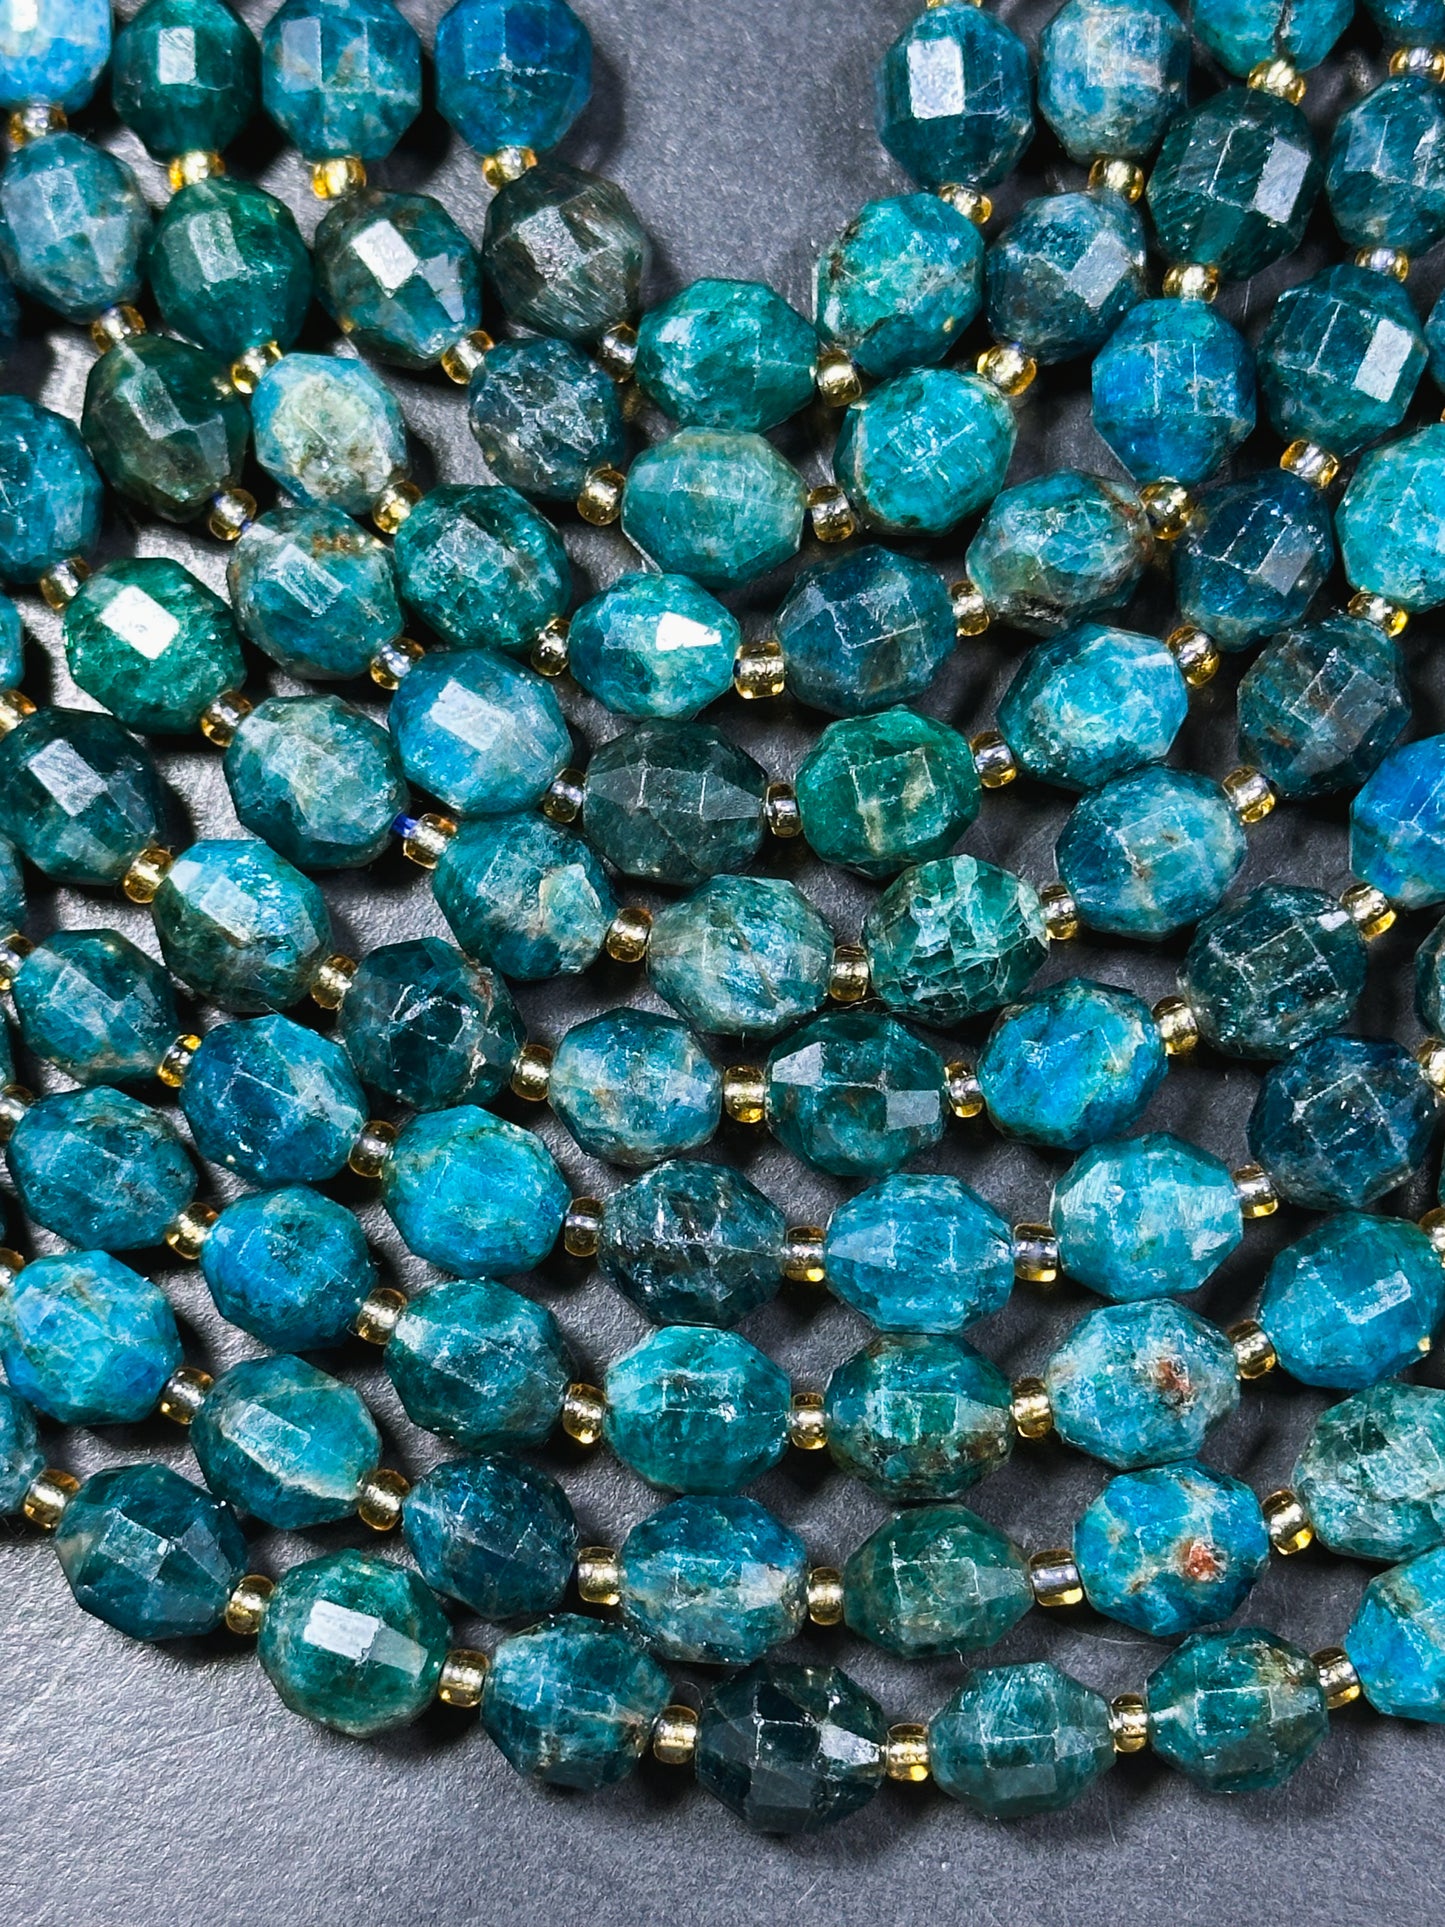 AAA Natural Apatite Gemstone Bead Faceted 10mm Diamond Cut Bead, Beautiful Natural Deep Blue Color Apatite Gemstone Bead Great Quality 15.5"